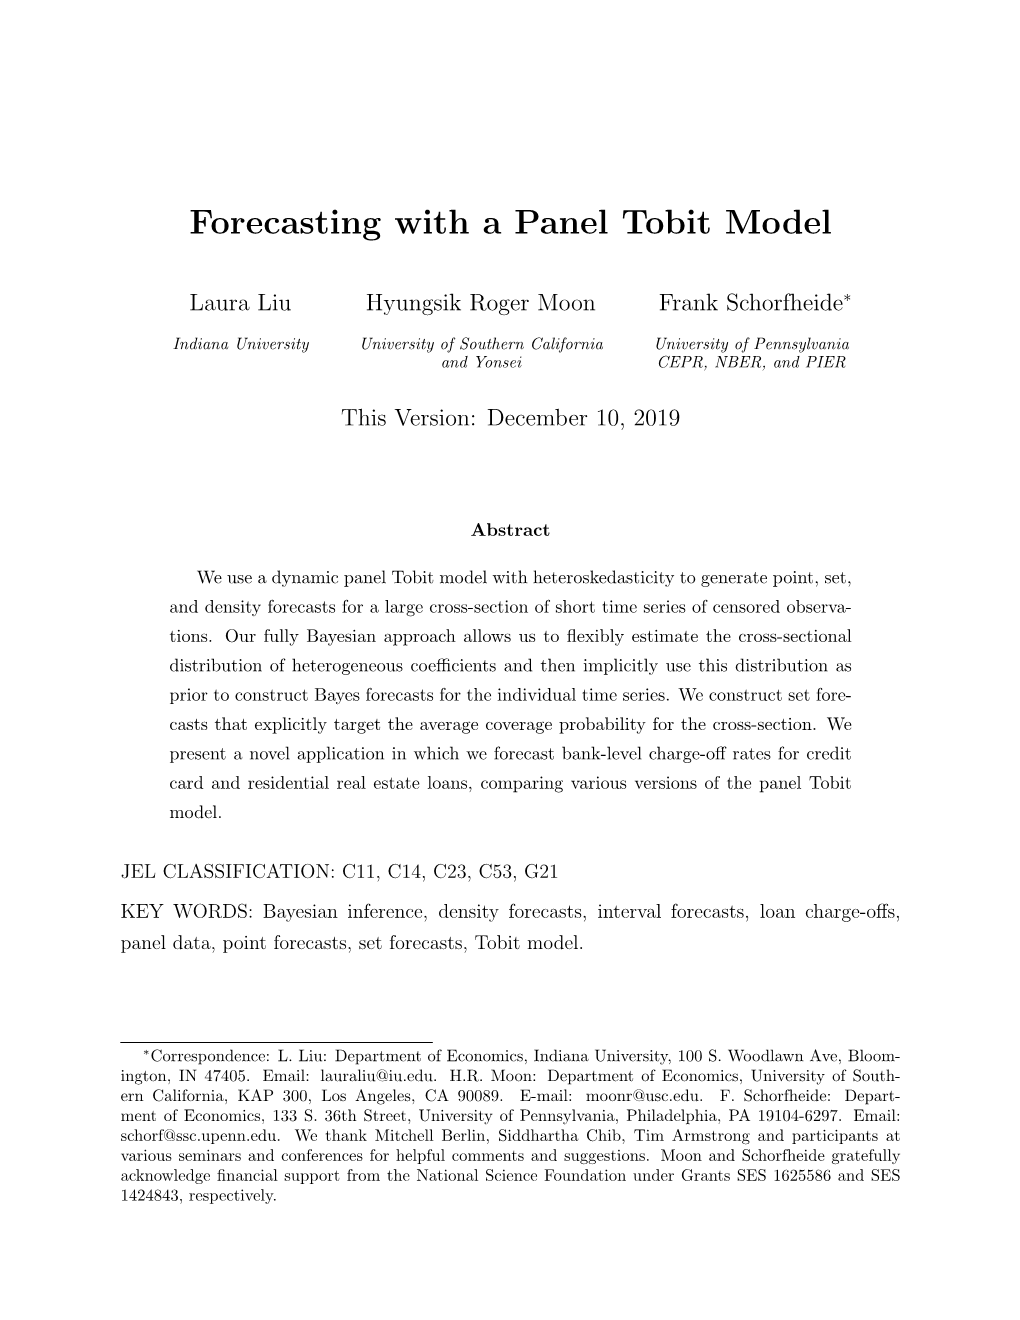 Forecasting with a Panel Tobit Model